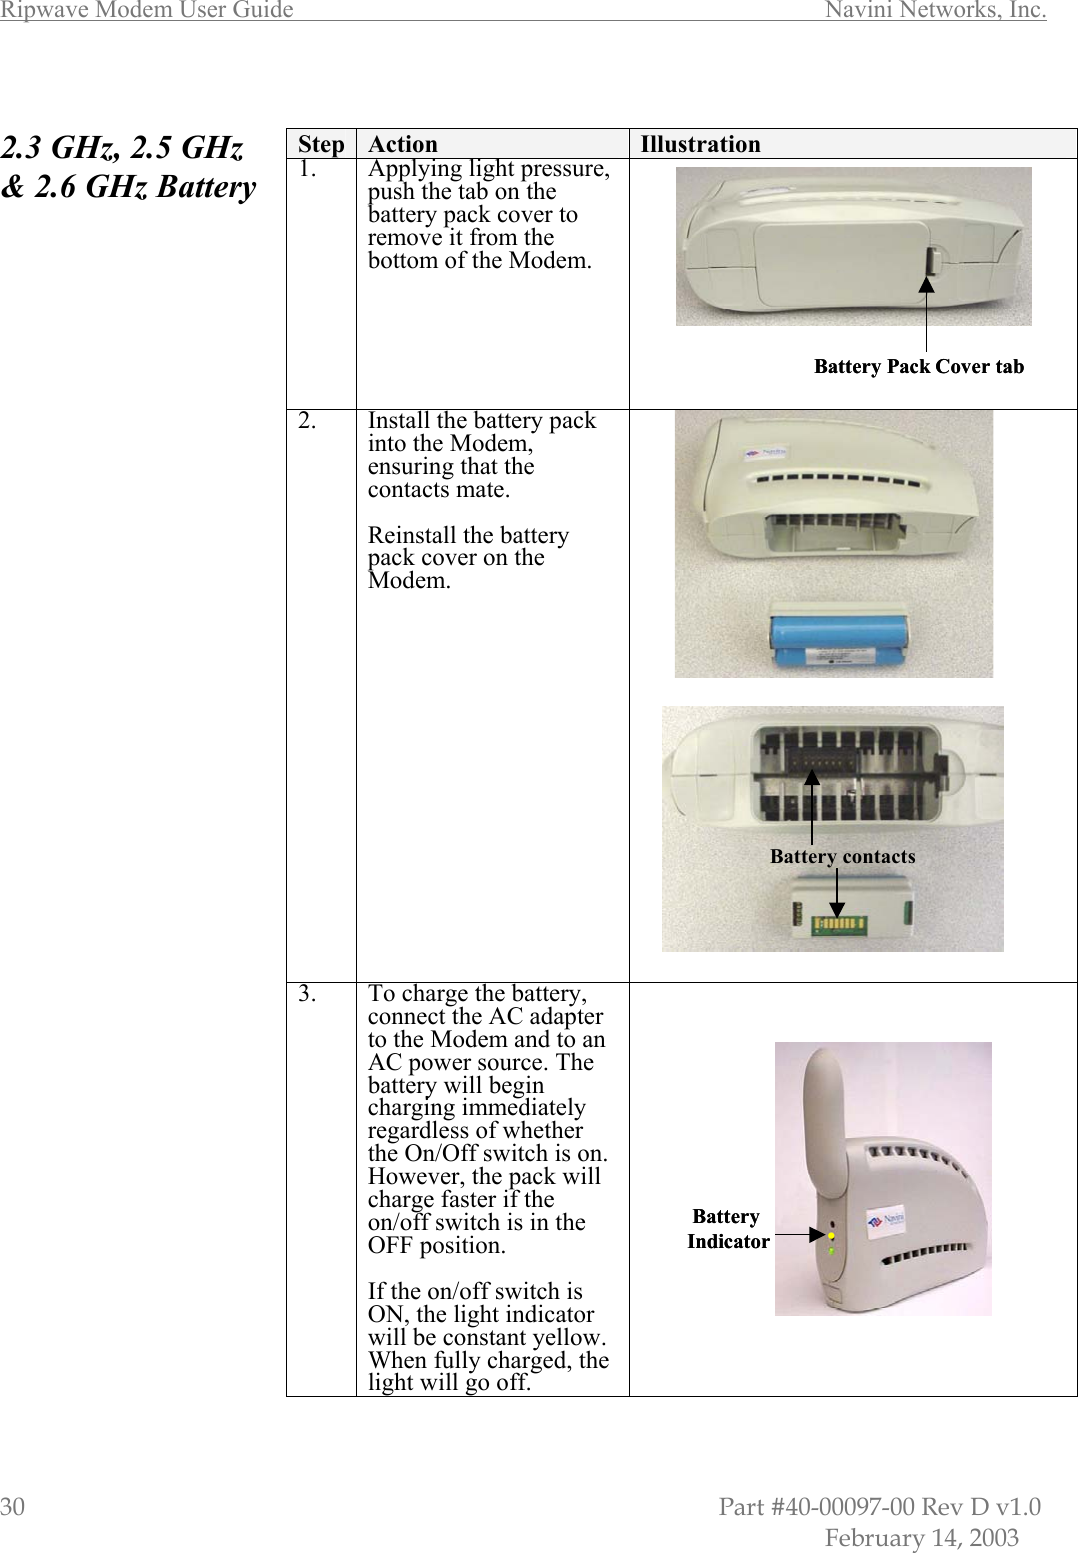 Ripwave Modem User Guide        Navini Networks, Inc. 30                         Part #40-00097-00 Rev D v1.0            February 14, 2003  2.3 GHz, 2.5 GHz &amp; 2.6 GHz Battery                                             Step  Action  Illustration 1.  Applying light pressure, push the tab on the battery pack cover to remove it from the bottom of the Modem.  2.  Install the battery pack into the Modem, ensuring that the contacts mate.  Reinstall the battery pack cover on the Modem.   3.  To charge the battery, connect the AC adapter to the Modem and to an AC power source. The battery will begin charging immediately regardless of whether the On/Off switch is on. However, the pack will charge faster if the on/off switch is in the OFF position.  If the on/off switch is ON, the light indicator will be constant yellow. When fully charged, the light will go off.   BatteryIndicator .BatteryIndicator .Battery Pack Cover tabBattery Pack Cover tabBattery contactsBattery contacts